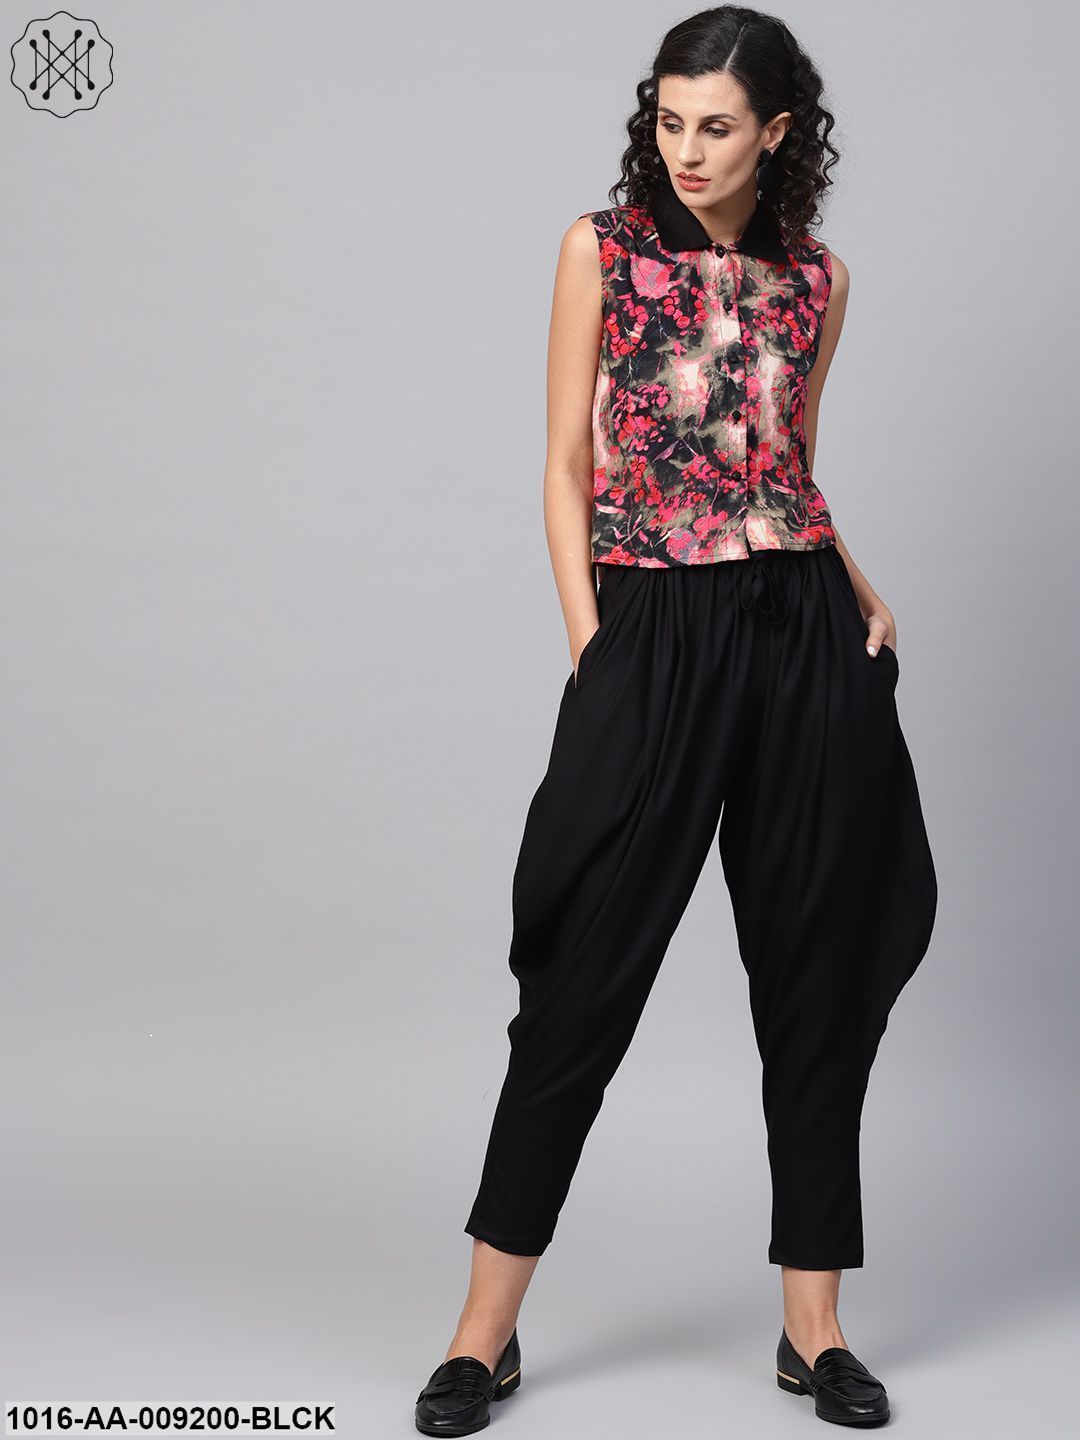 Pink & Black Printed Sleeveless Tops With Black Ankle Length Balloon Pant